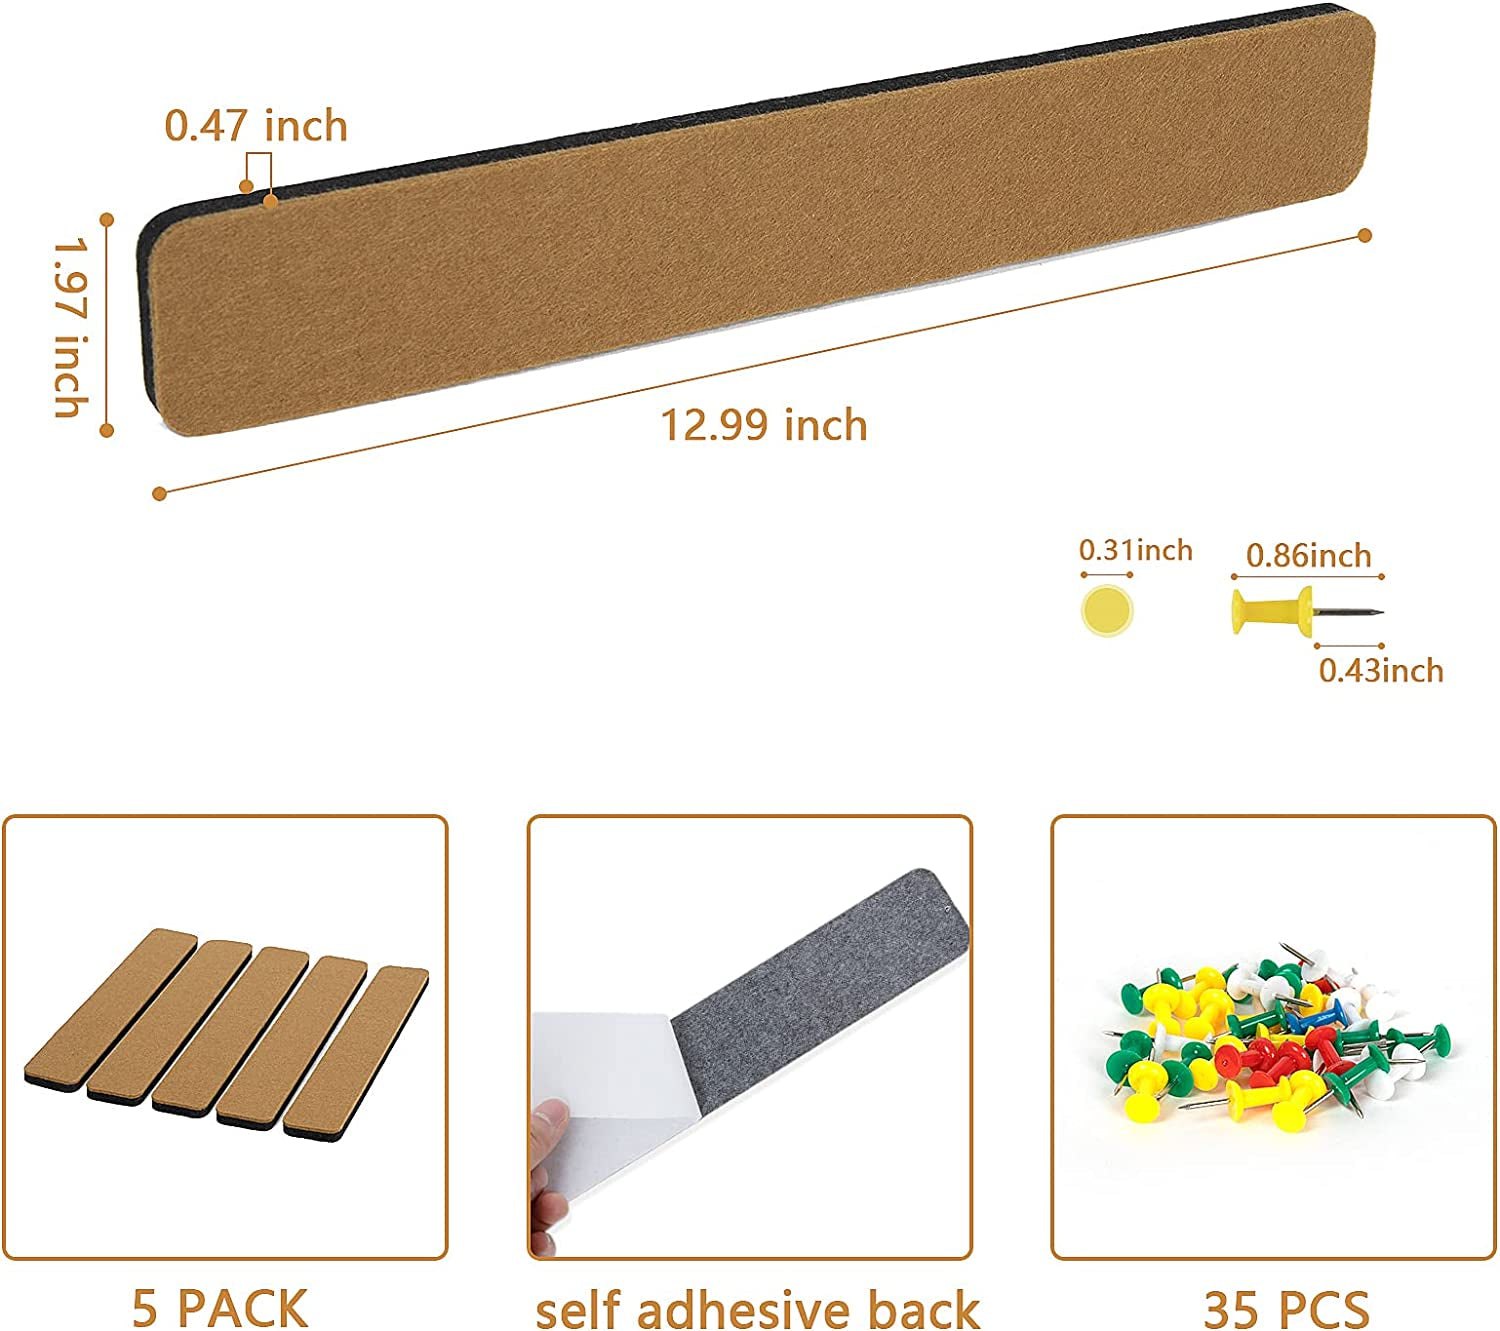 Felt Pin Board Bar Strips Bulletin Board for Bedrooms Offices Home Wall Decoration, Notice Board Self Adhesive Cork Board with 35 Push Pins for Paste Notes, Photos, Schedules